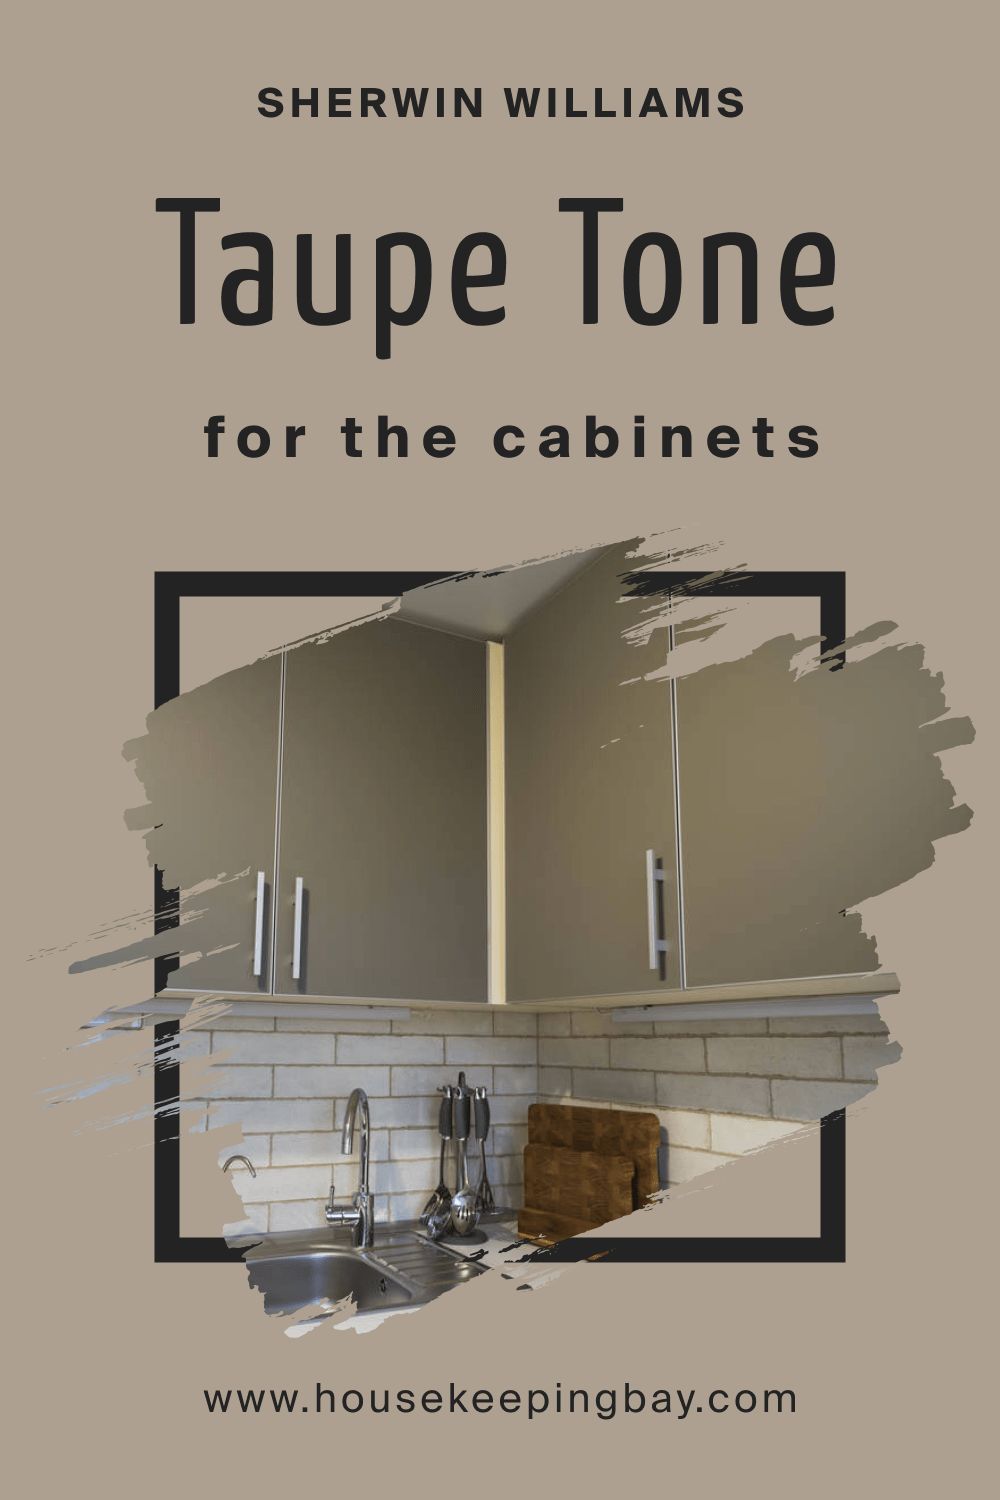 Sherwin Williams.Taupe Tone SW 7633 For the Cabinets